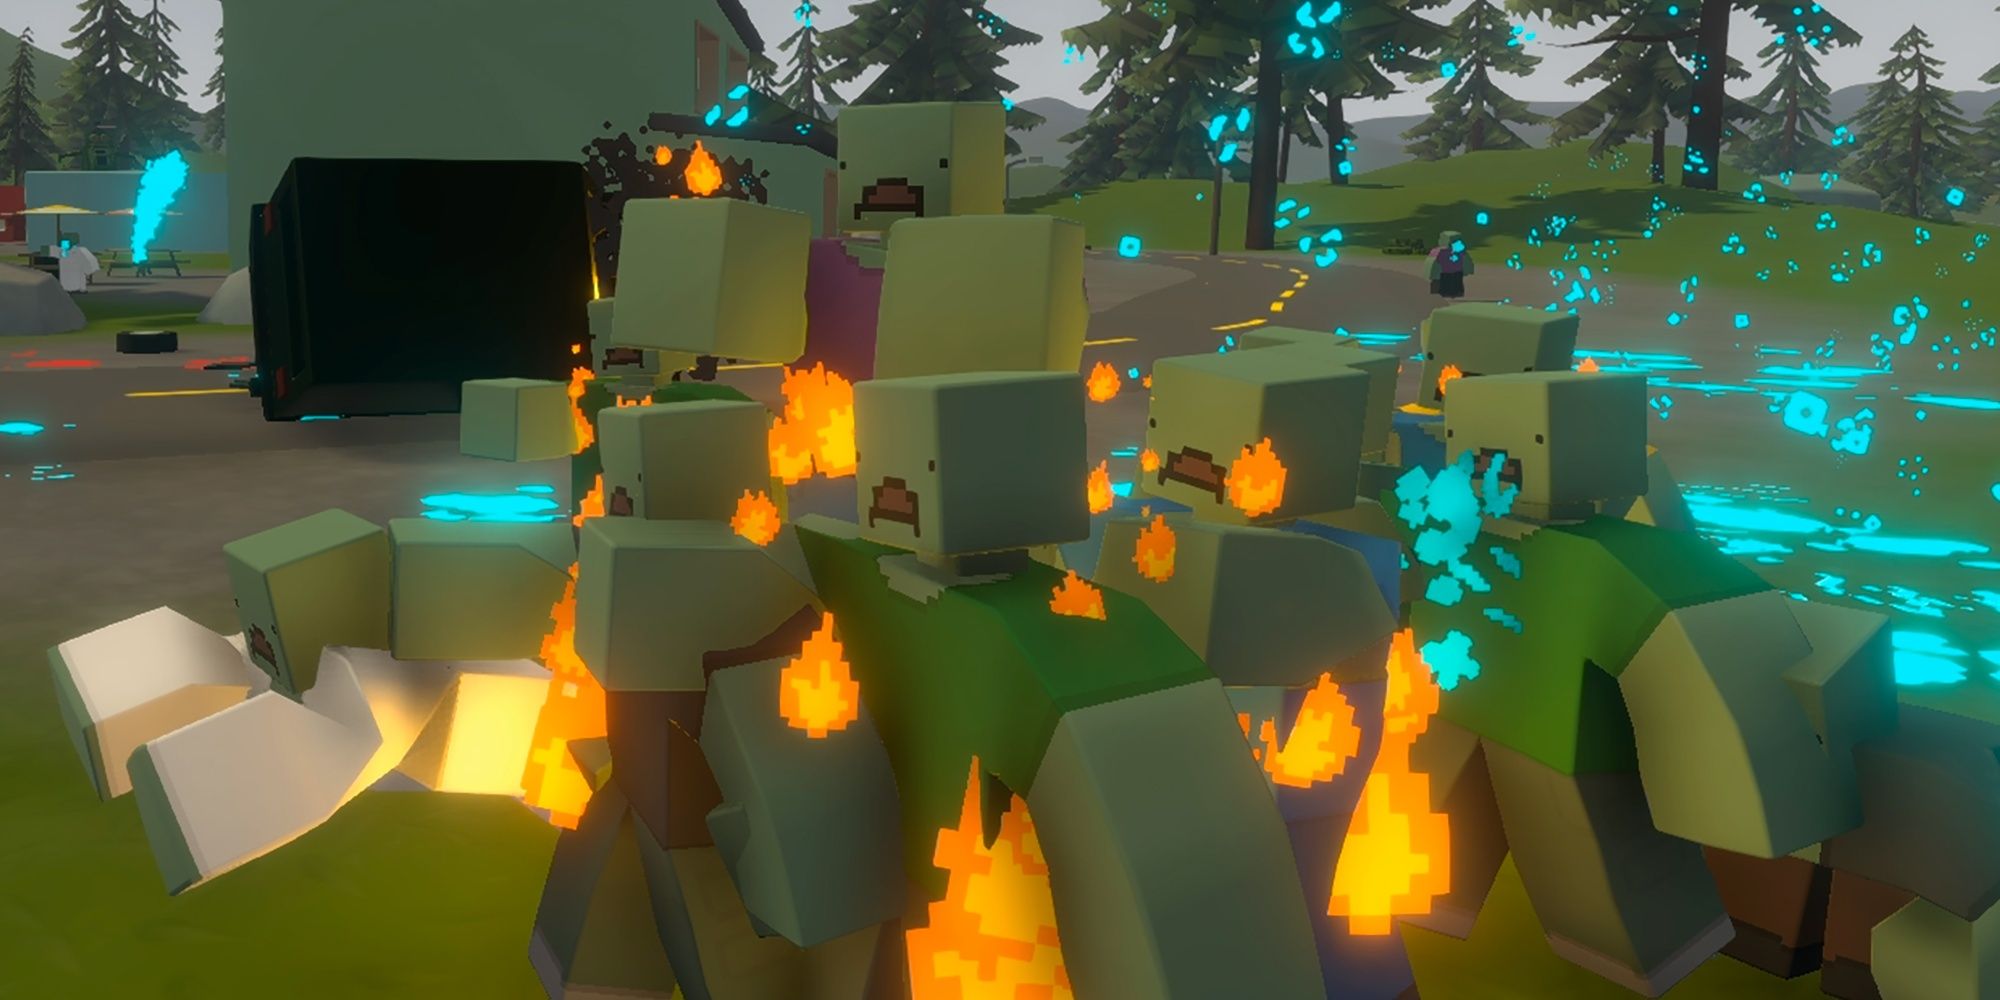 A group of zombies have been set on fire